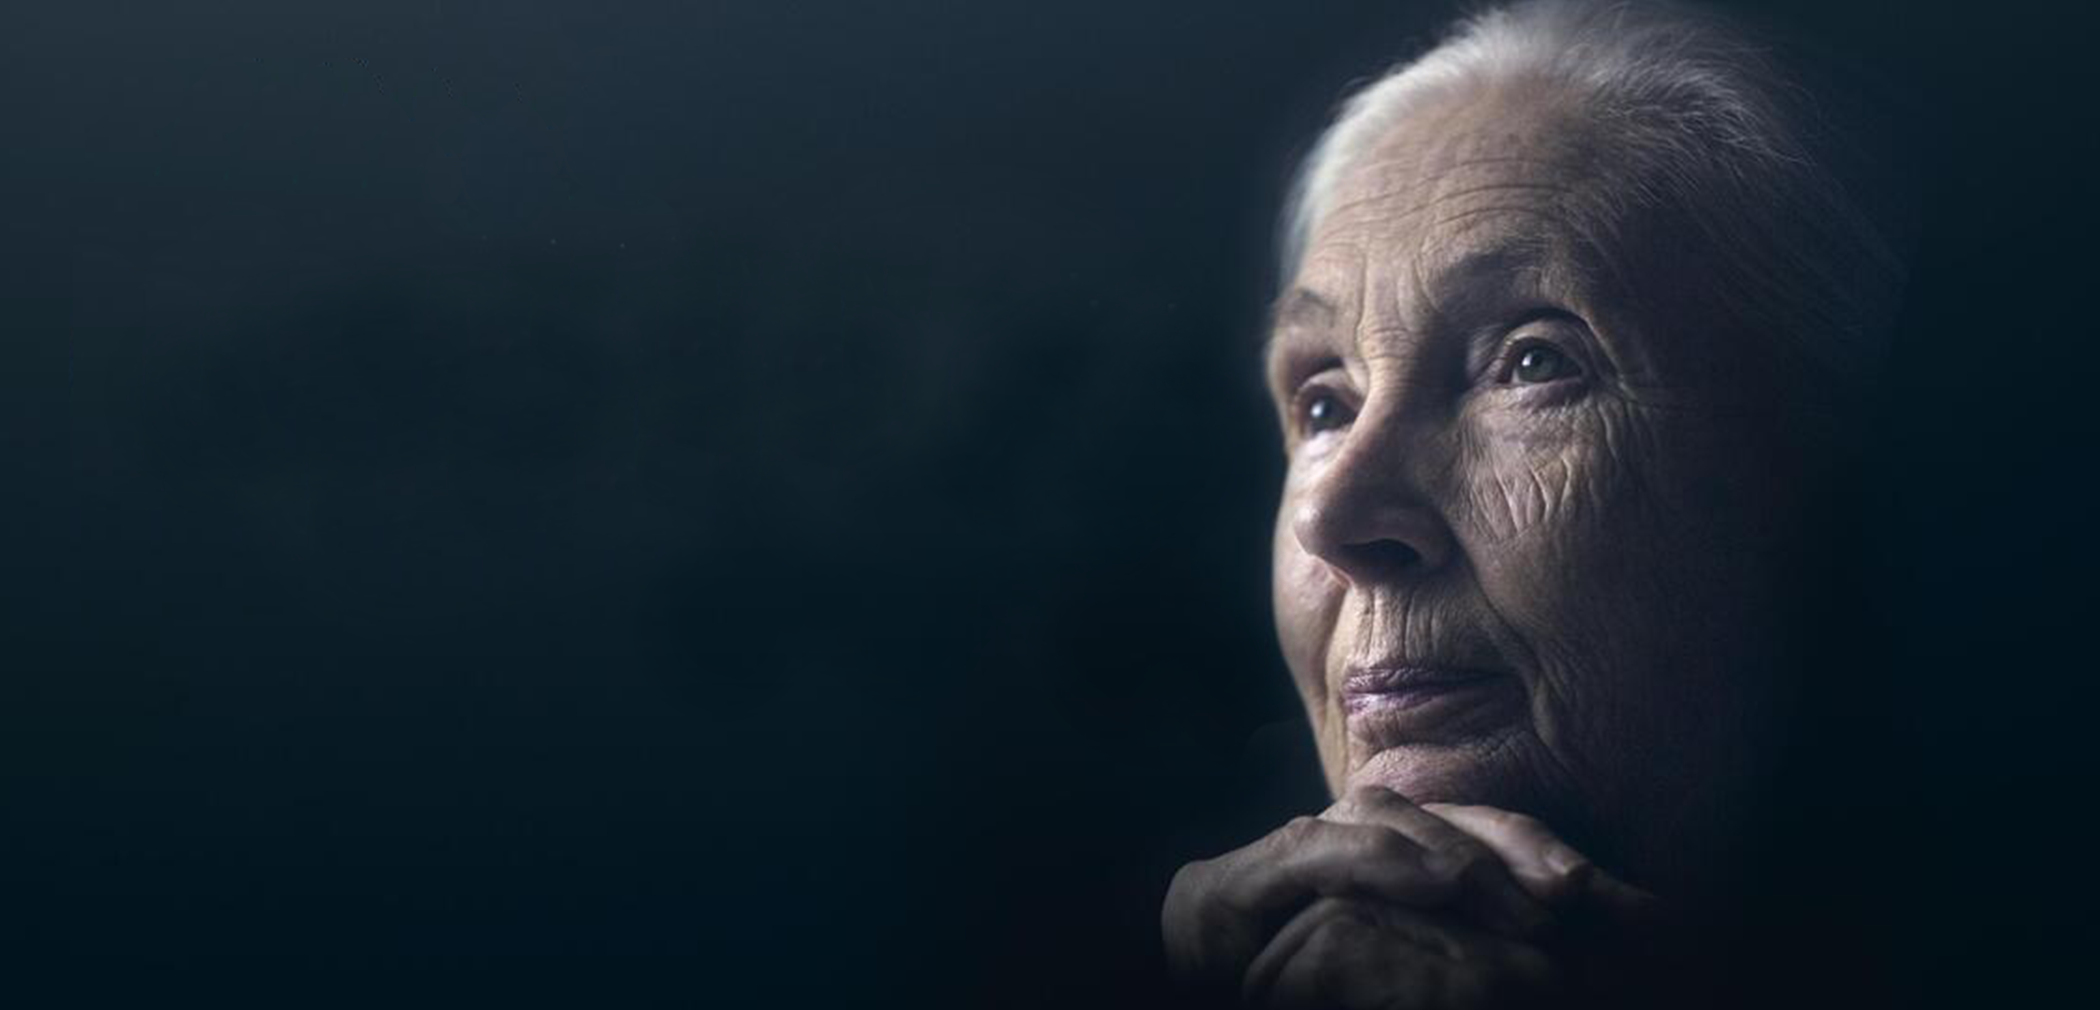 Face of Jane Goodall staring into the distance against a black background